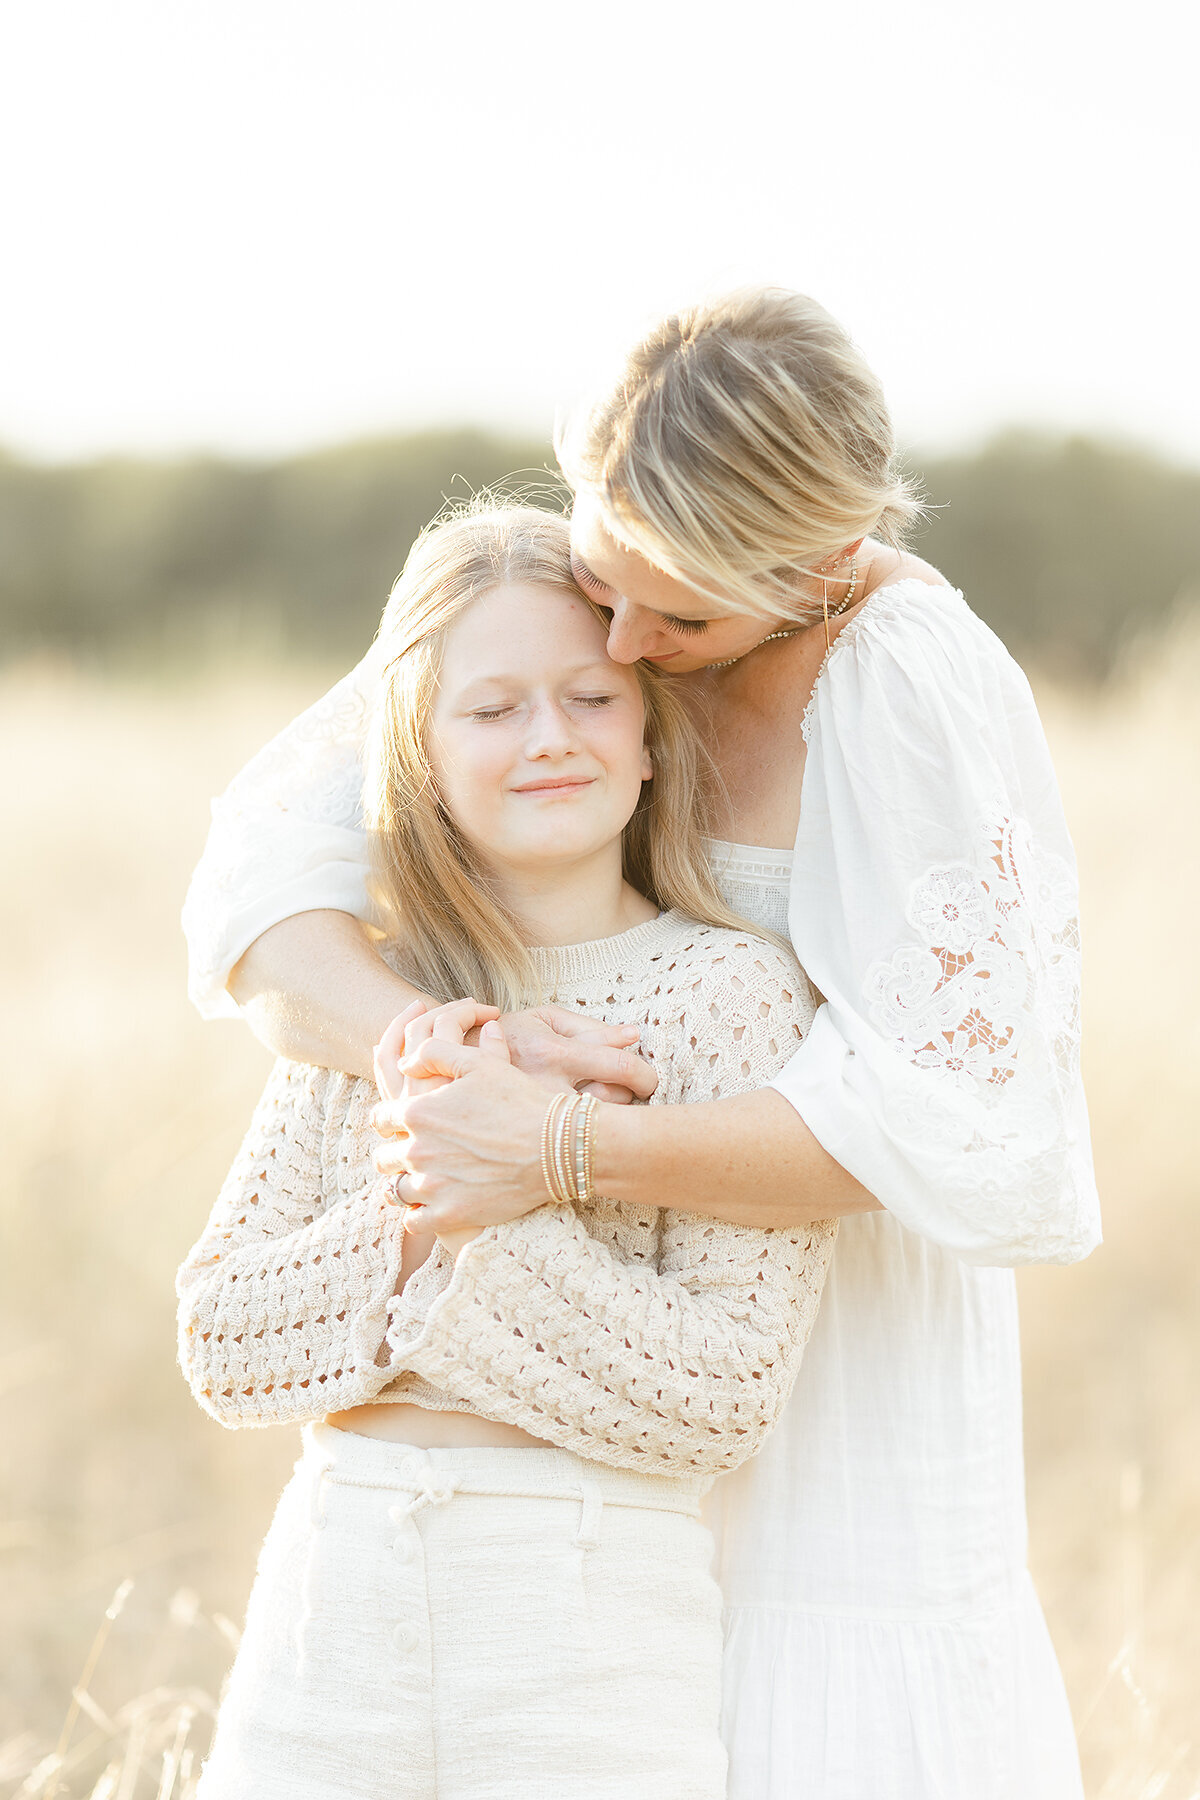 Photo of a mother holding her daughter tightly as her daughter smiles and embraces this moment with her mother as their family photographer captures the moment.